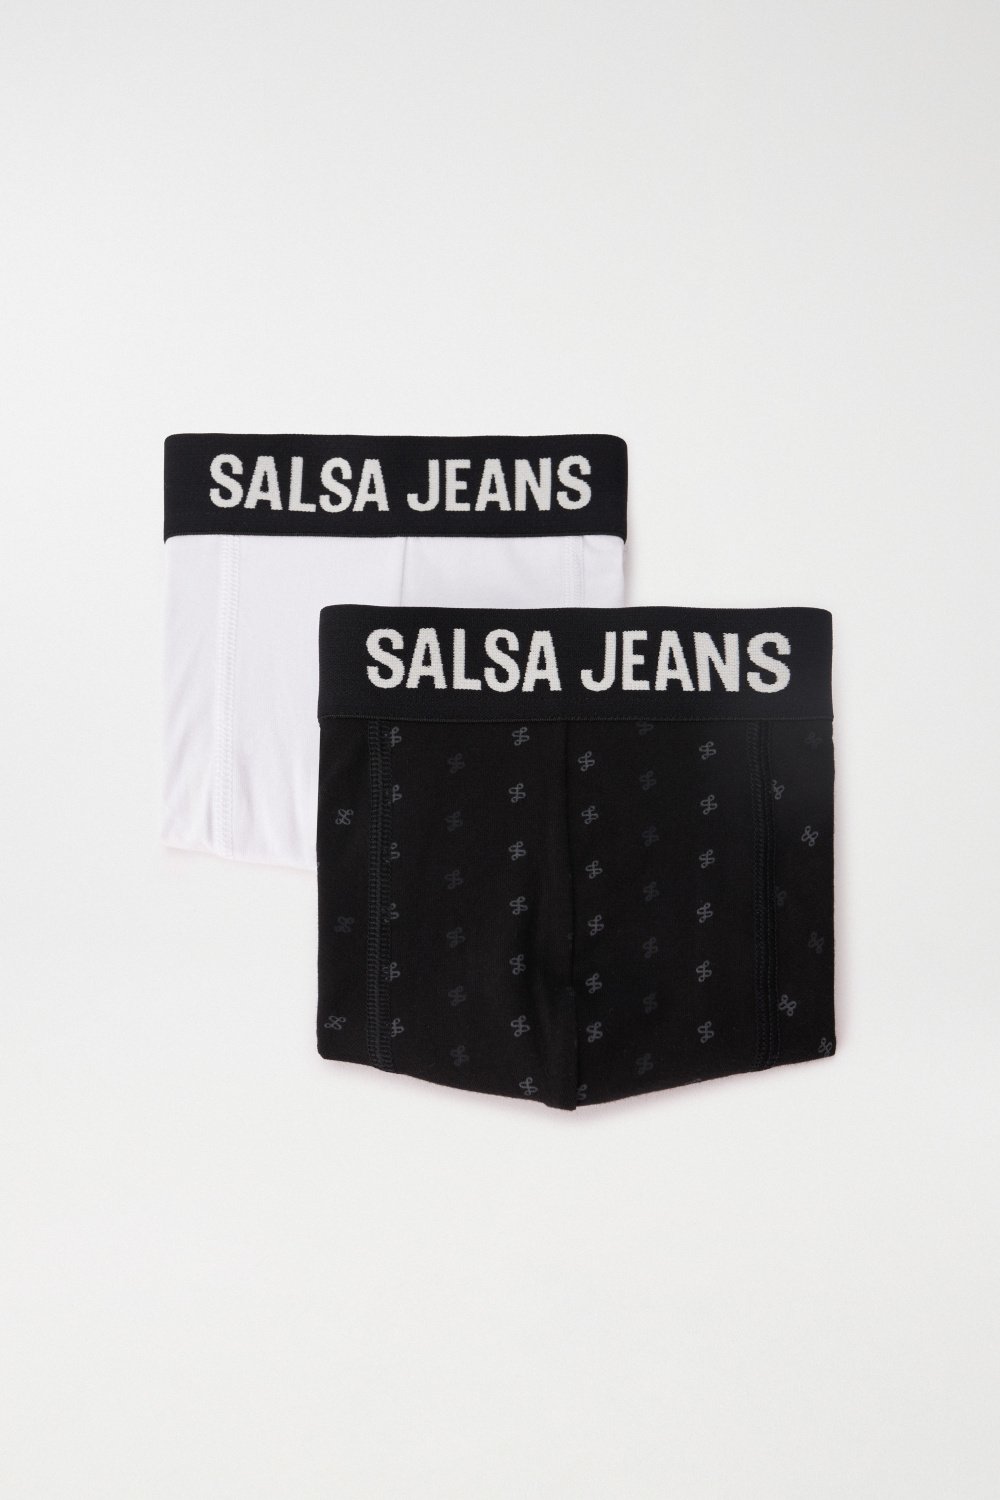 PACK OF BOXERS - Salsa